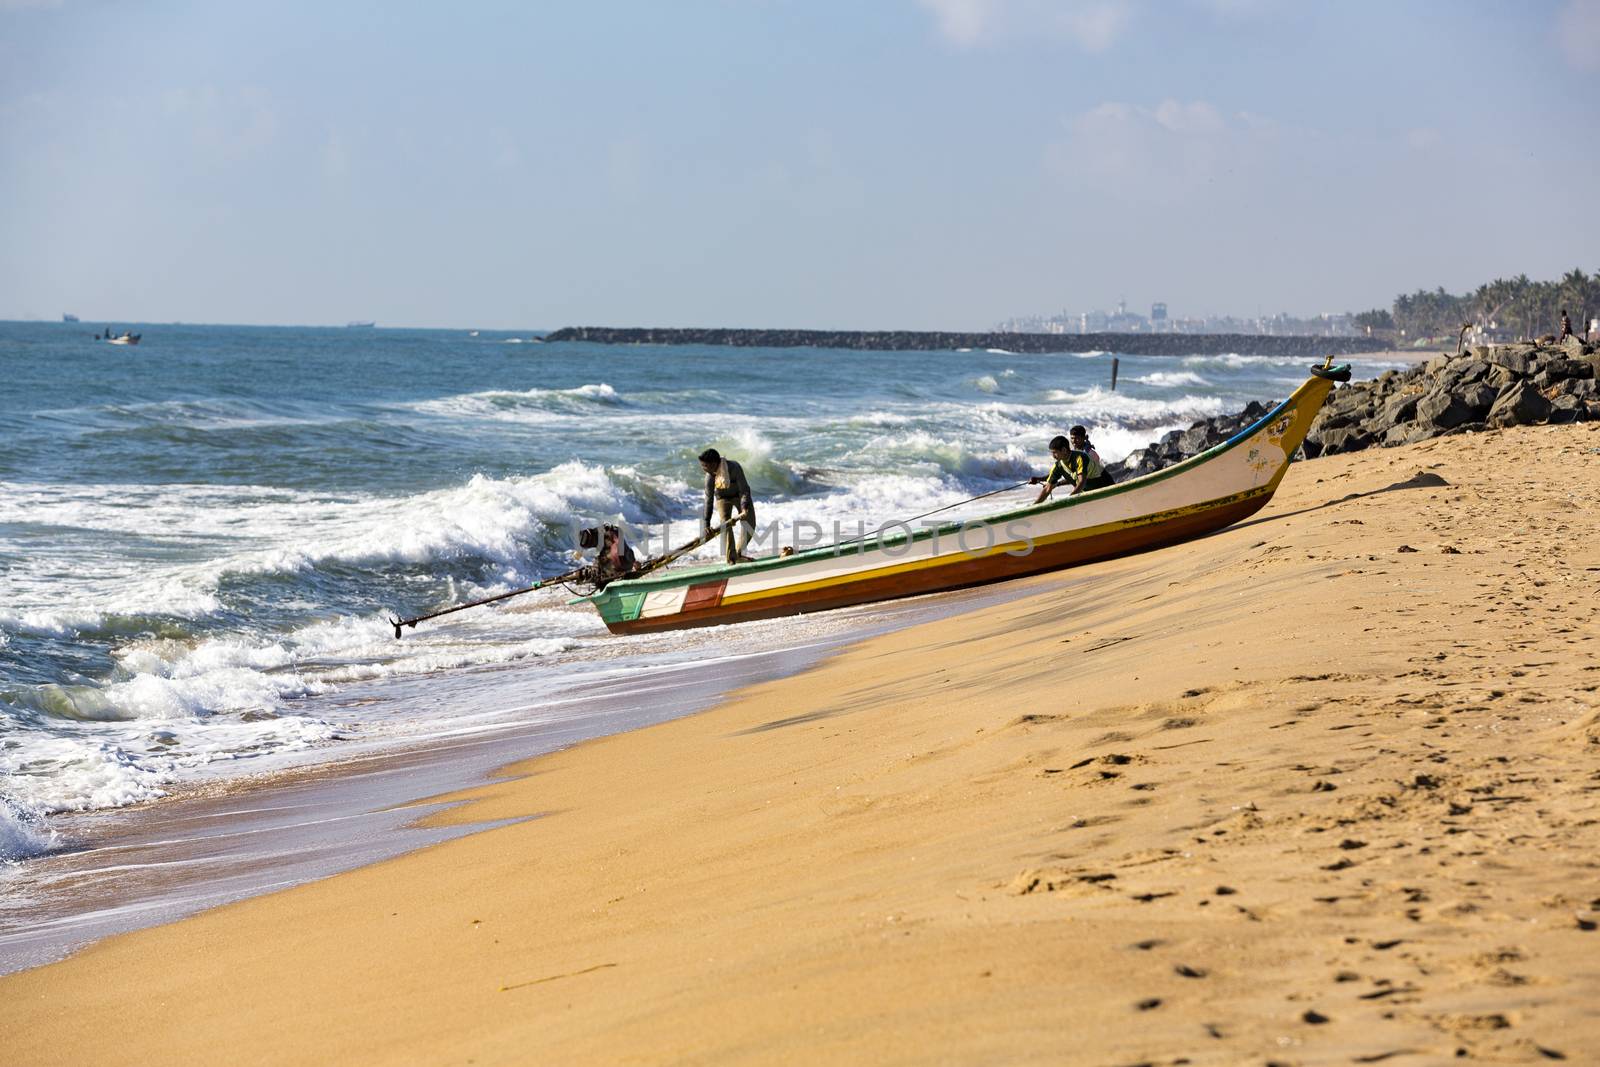 Documentary images : Fishermen at Pondichery, India by CatherineL-Prod